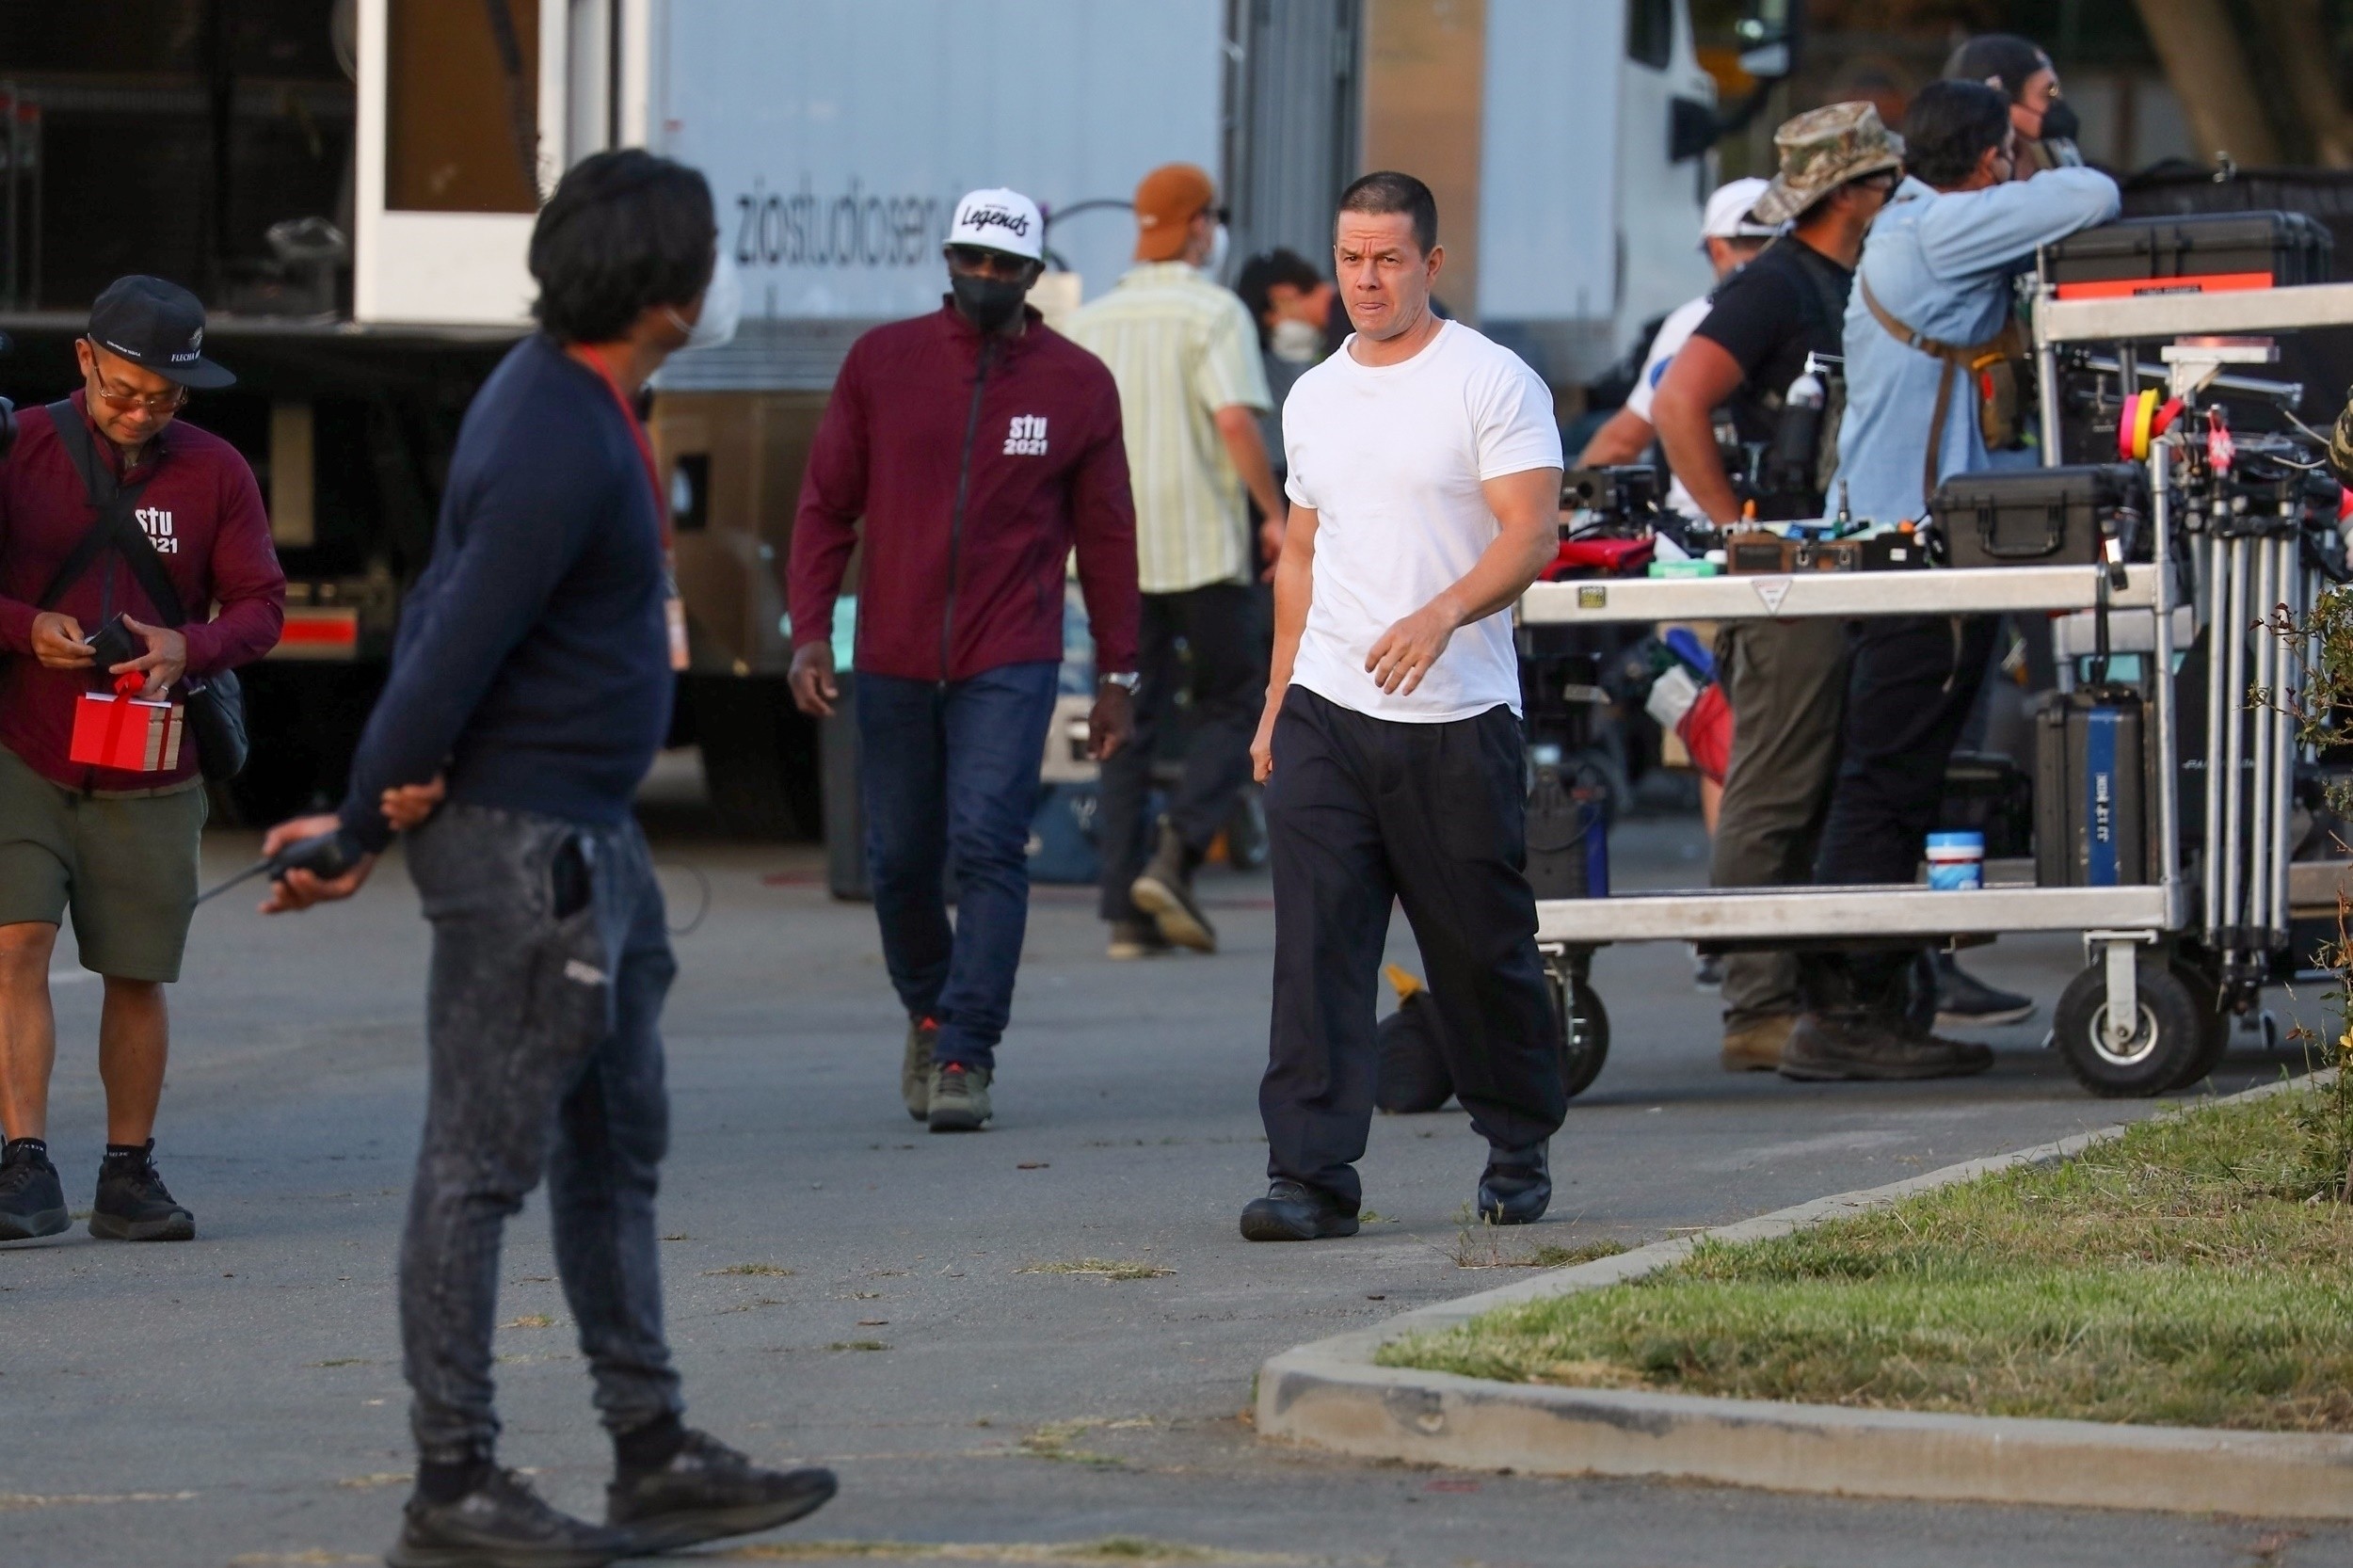 Photo © 2021 Backgrid/The Grosby GroupEXCLUSIVEMalibu, CA  Mark Wahlberg is spotted again wearing the fat suit as as he and Mel Gibson continue to film scenes for 'Stu' in Malibu. The actor who has put on weight for the role was seen on set in a t-shi (Foto: Backgrid/The Grosby Group)